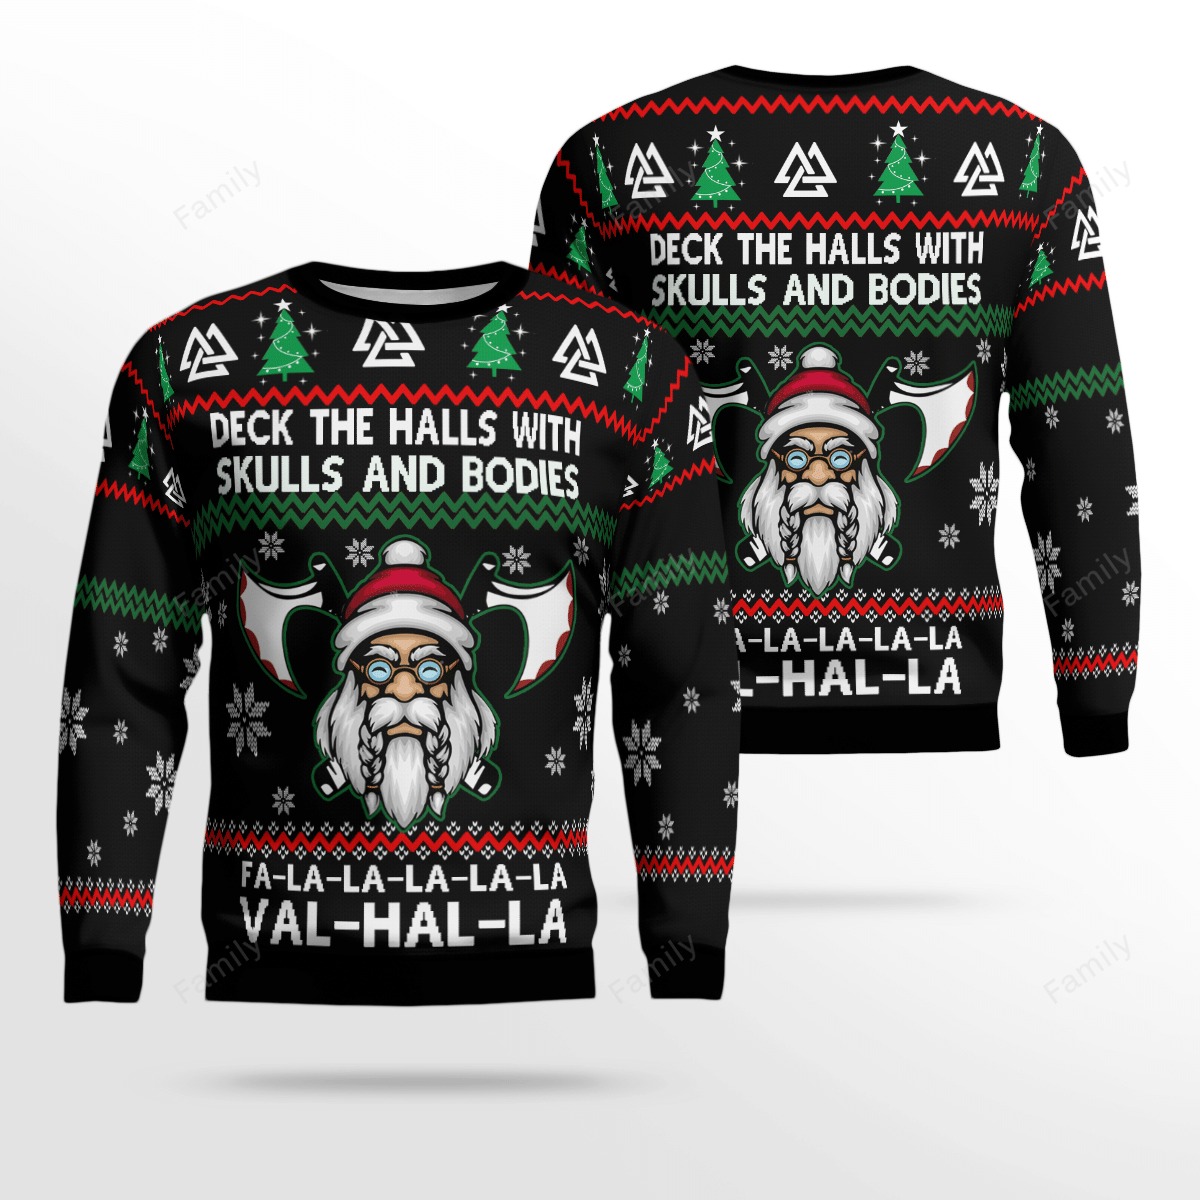 Viking Deck the halls with skulls and bodies sweater